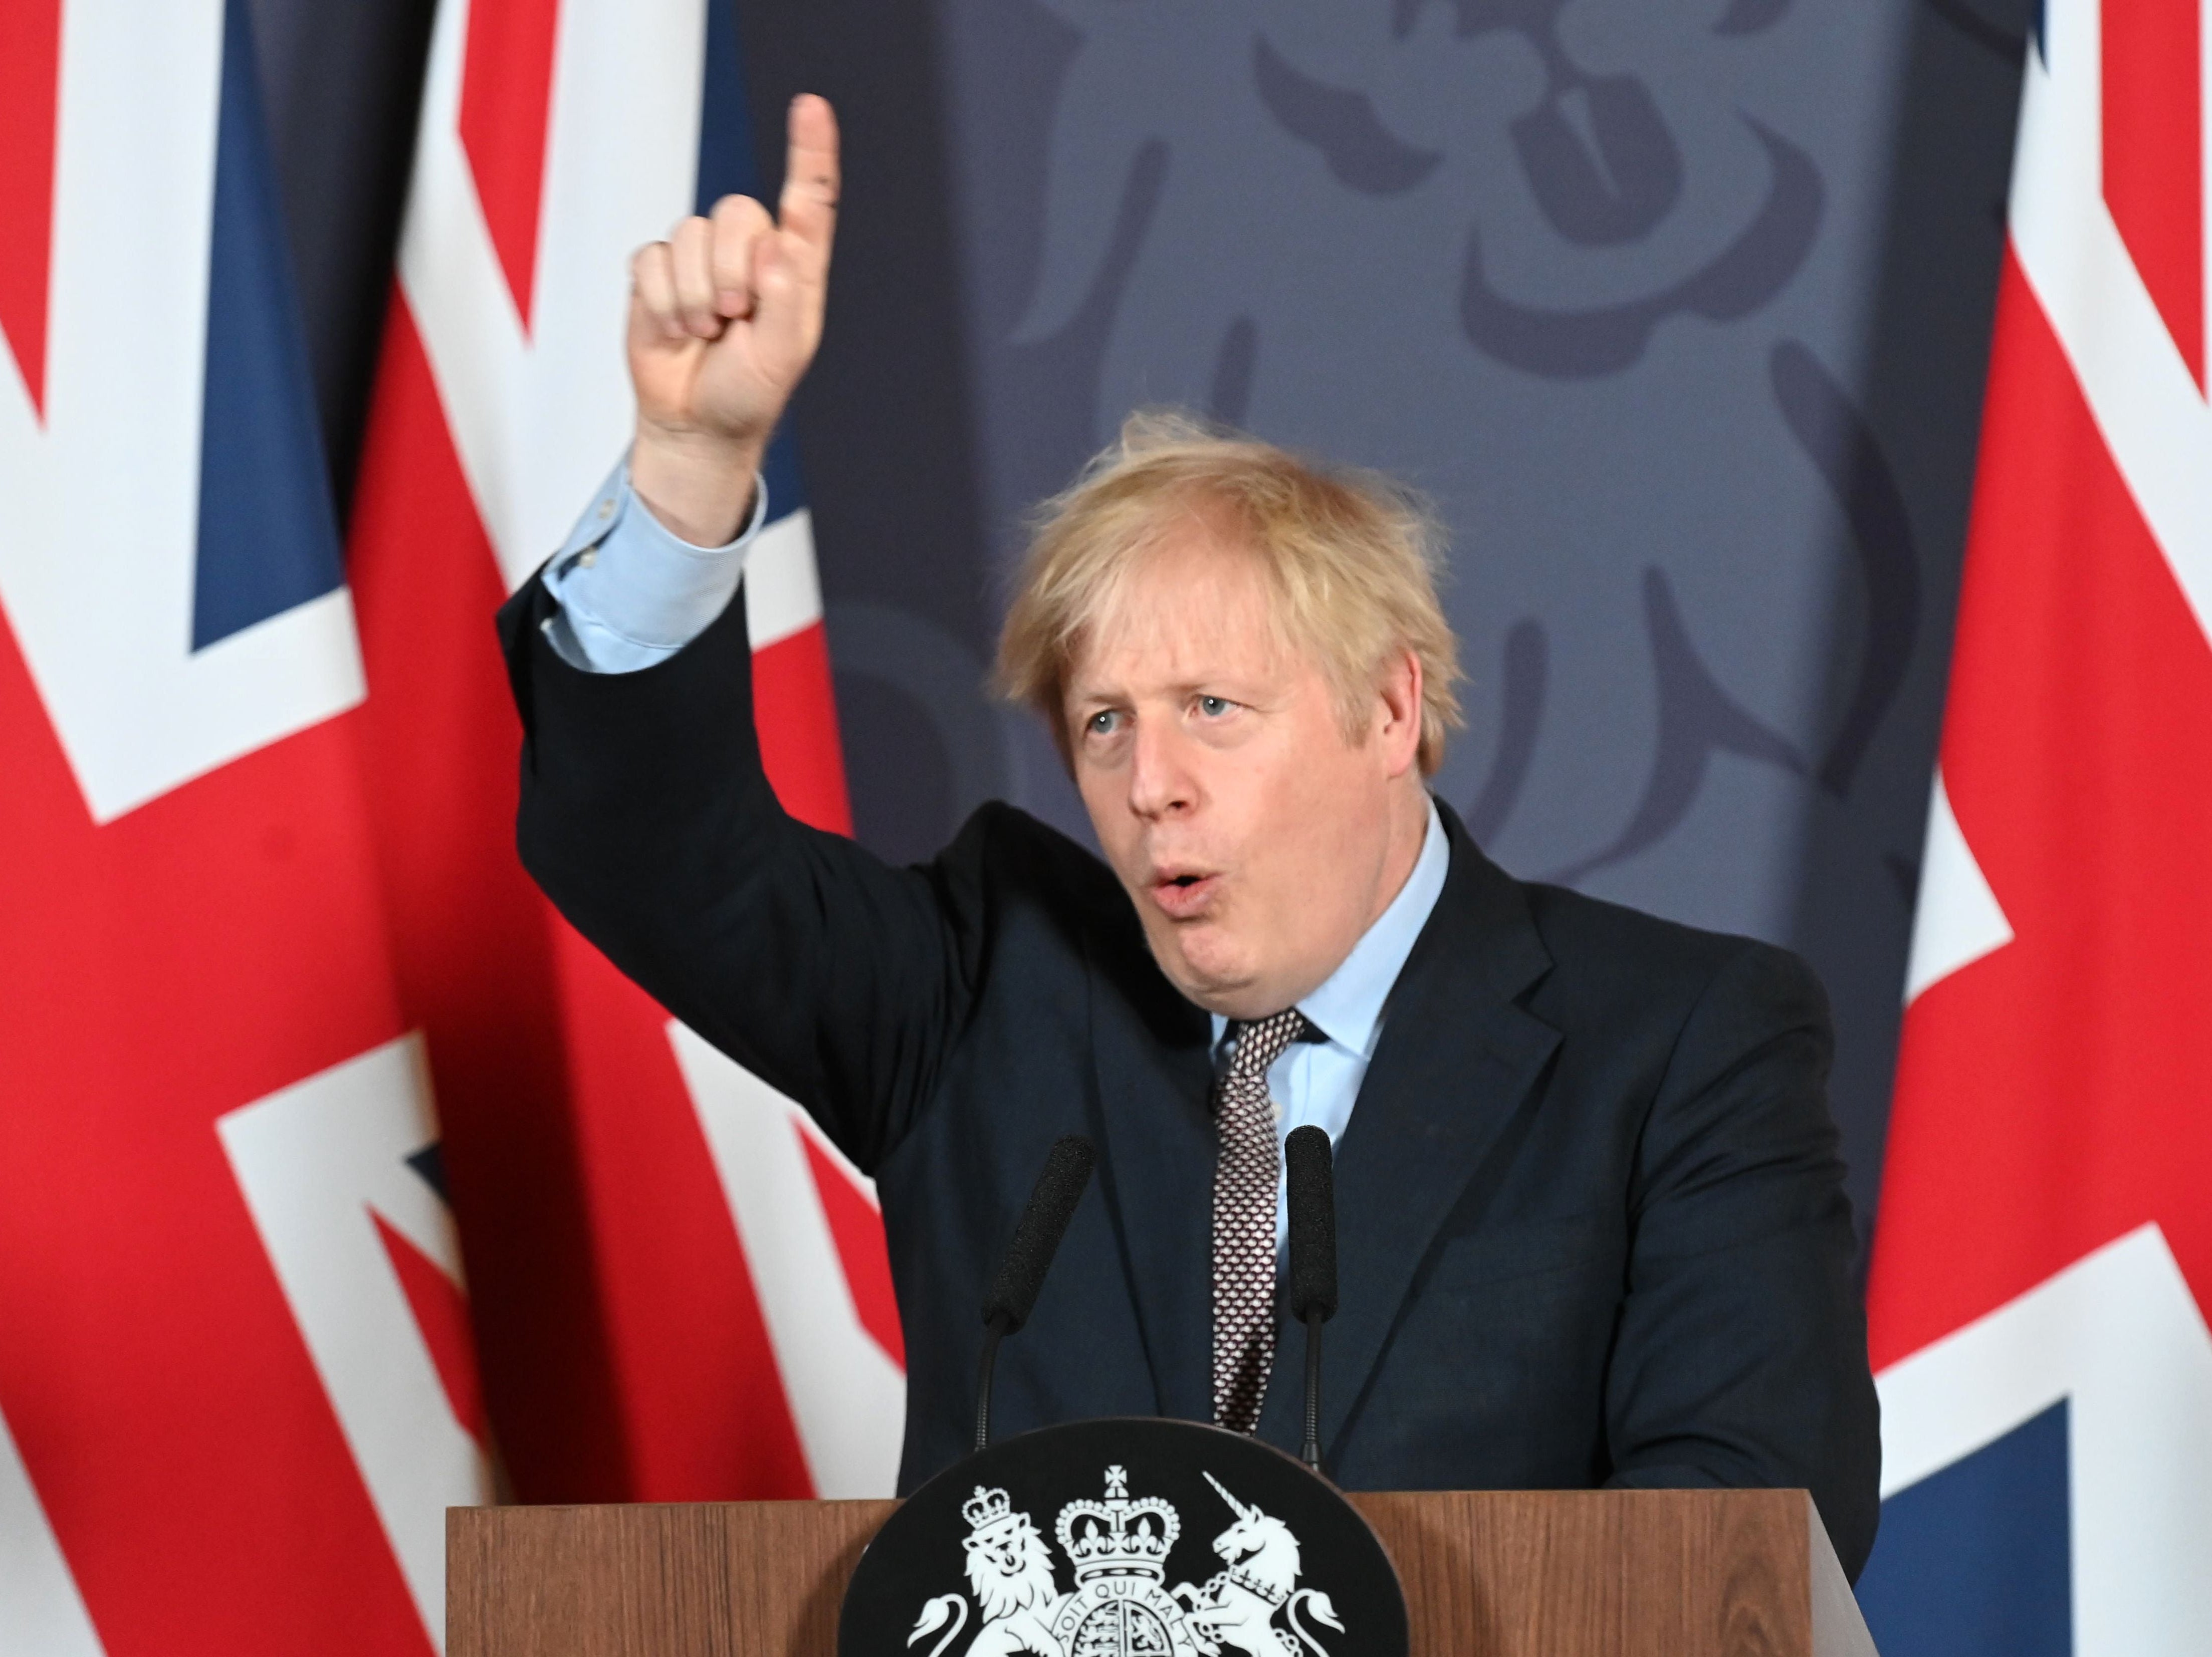 Boris Johnson has been touting the success of his deal-making